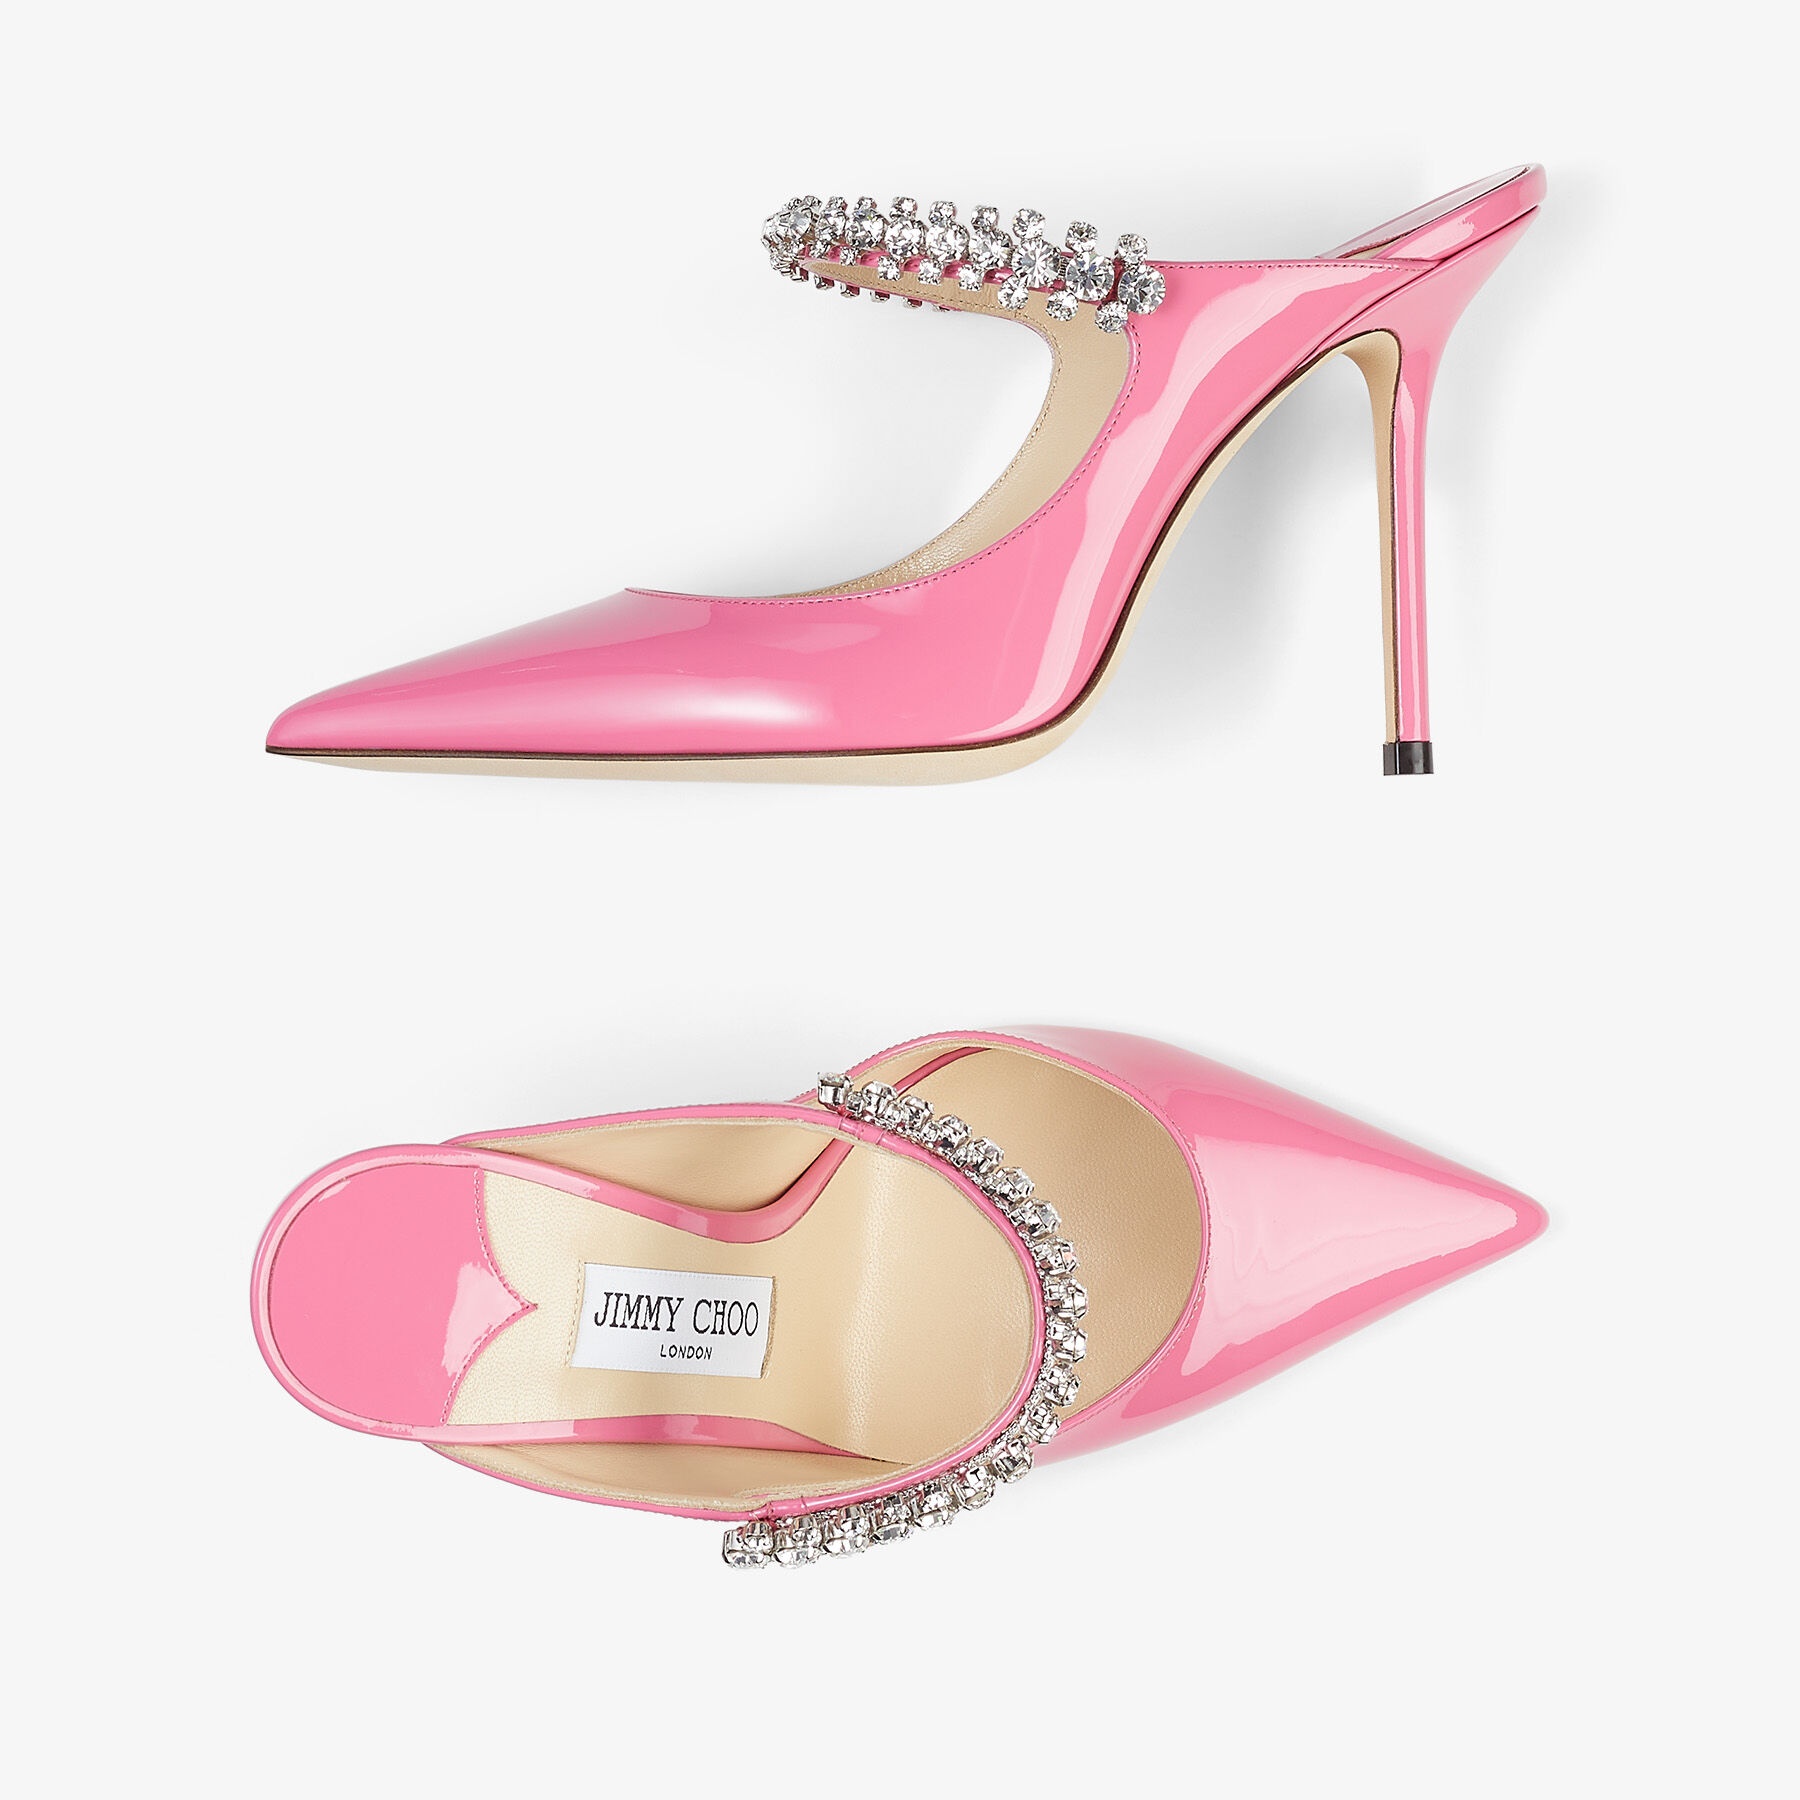 Bing 100
Candy Pink Patent Leather Pumps with Crystal Strap - 4